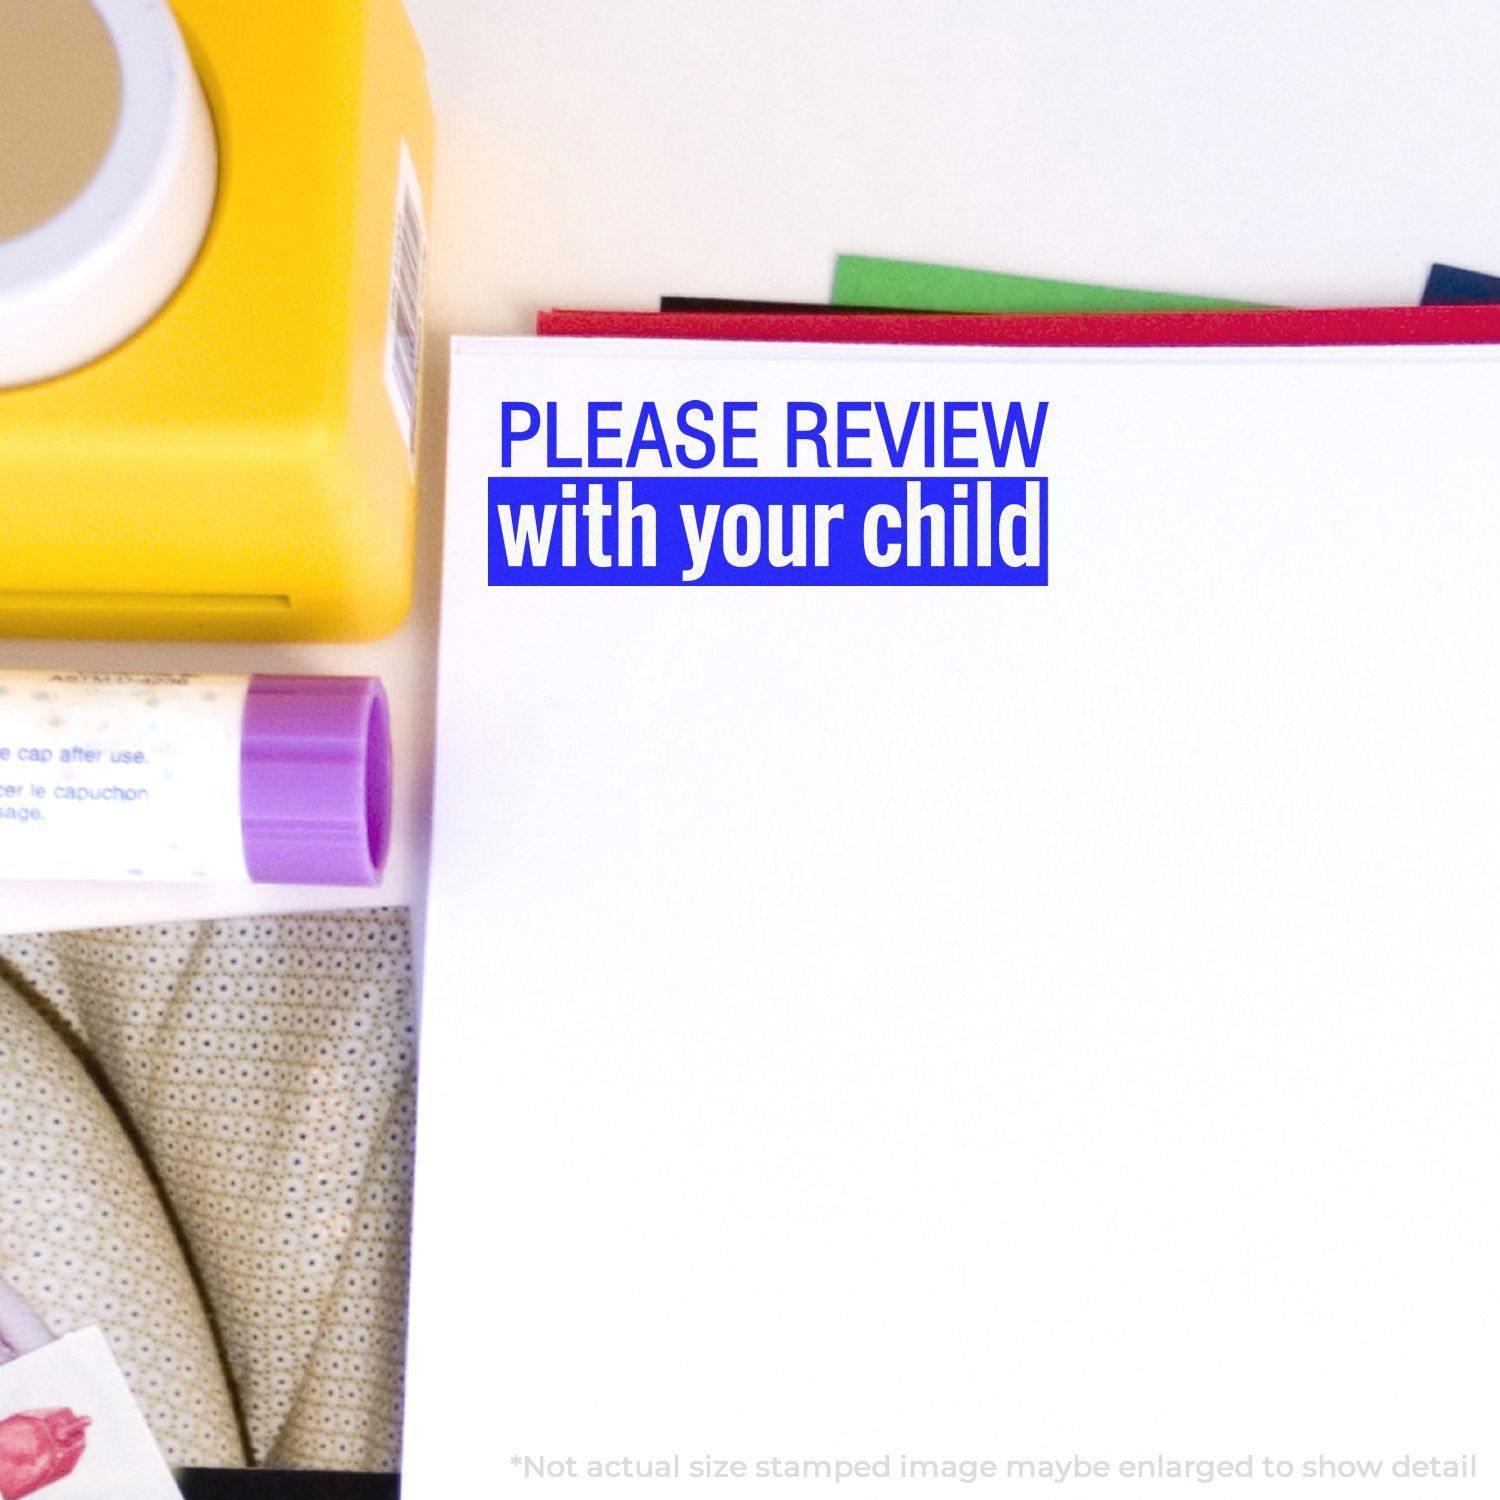 A stock office rubber stamp with a stamped image showing how the text "PLEASE REVIEW with your child" in a large font and in a two-color format is displayed after stamping.